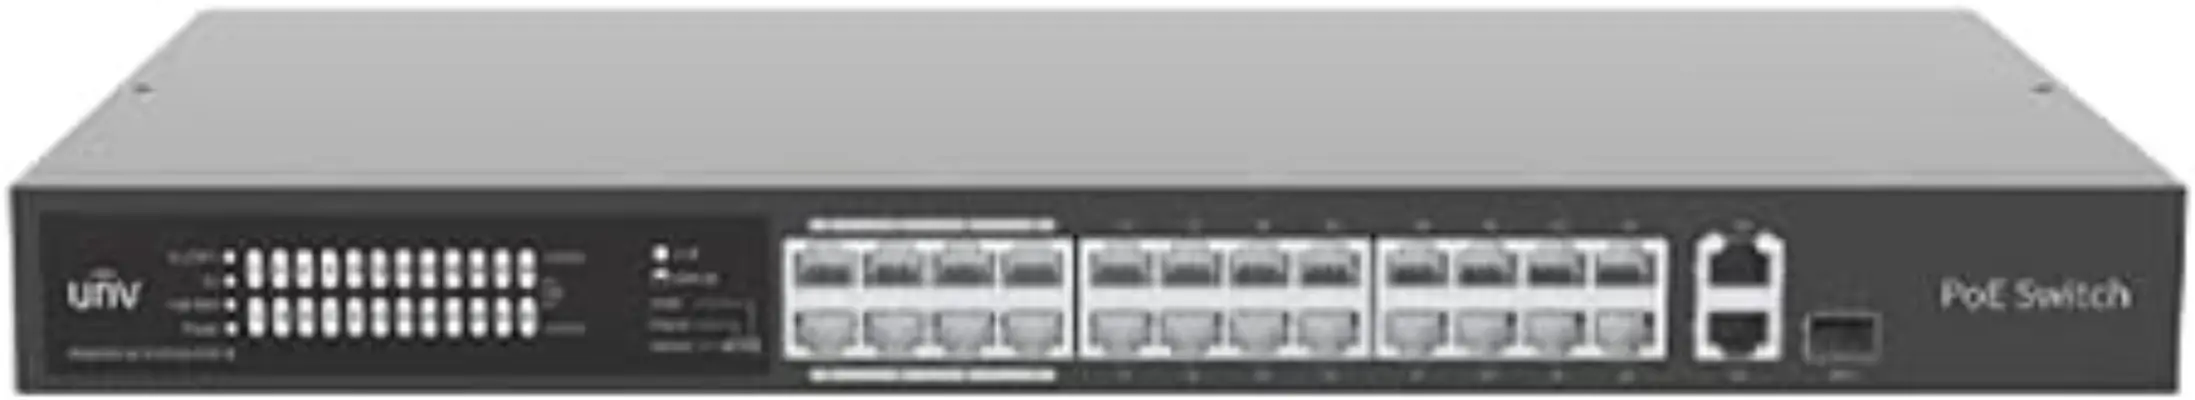 UNV NSW2020-16T1GT1GC-POE-IN Port Configuration PoE Support Managed Switch Layer 2/Layer 3 Support Redundancy Features Rack-Mountable Network Segmentation Advanced Networking Capabilities